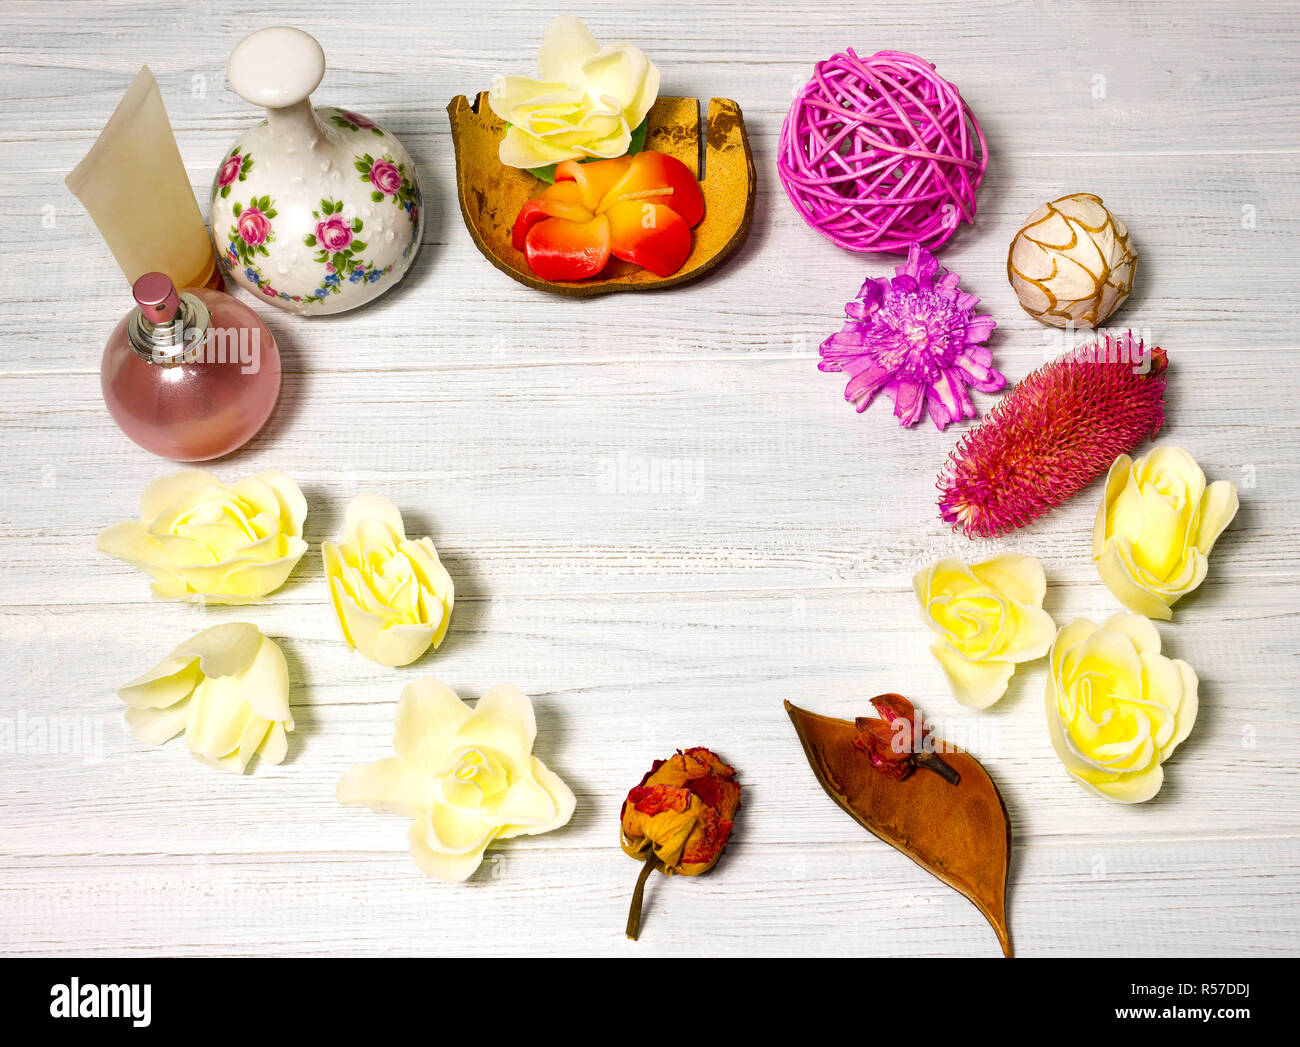 Beautiful spa setting with candle and flowers, balls on wooden board Stock Photo